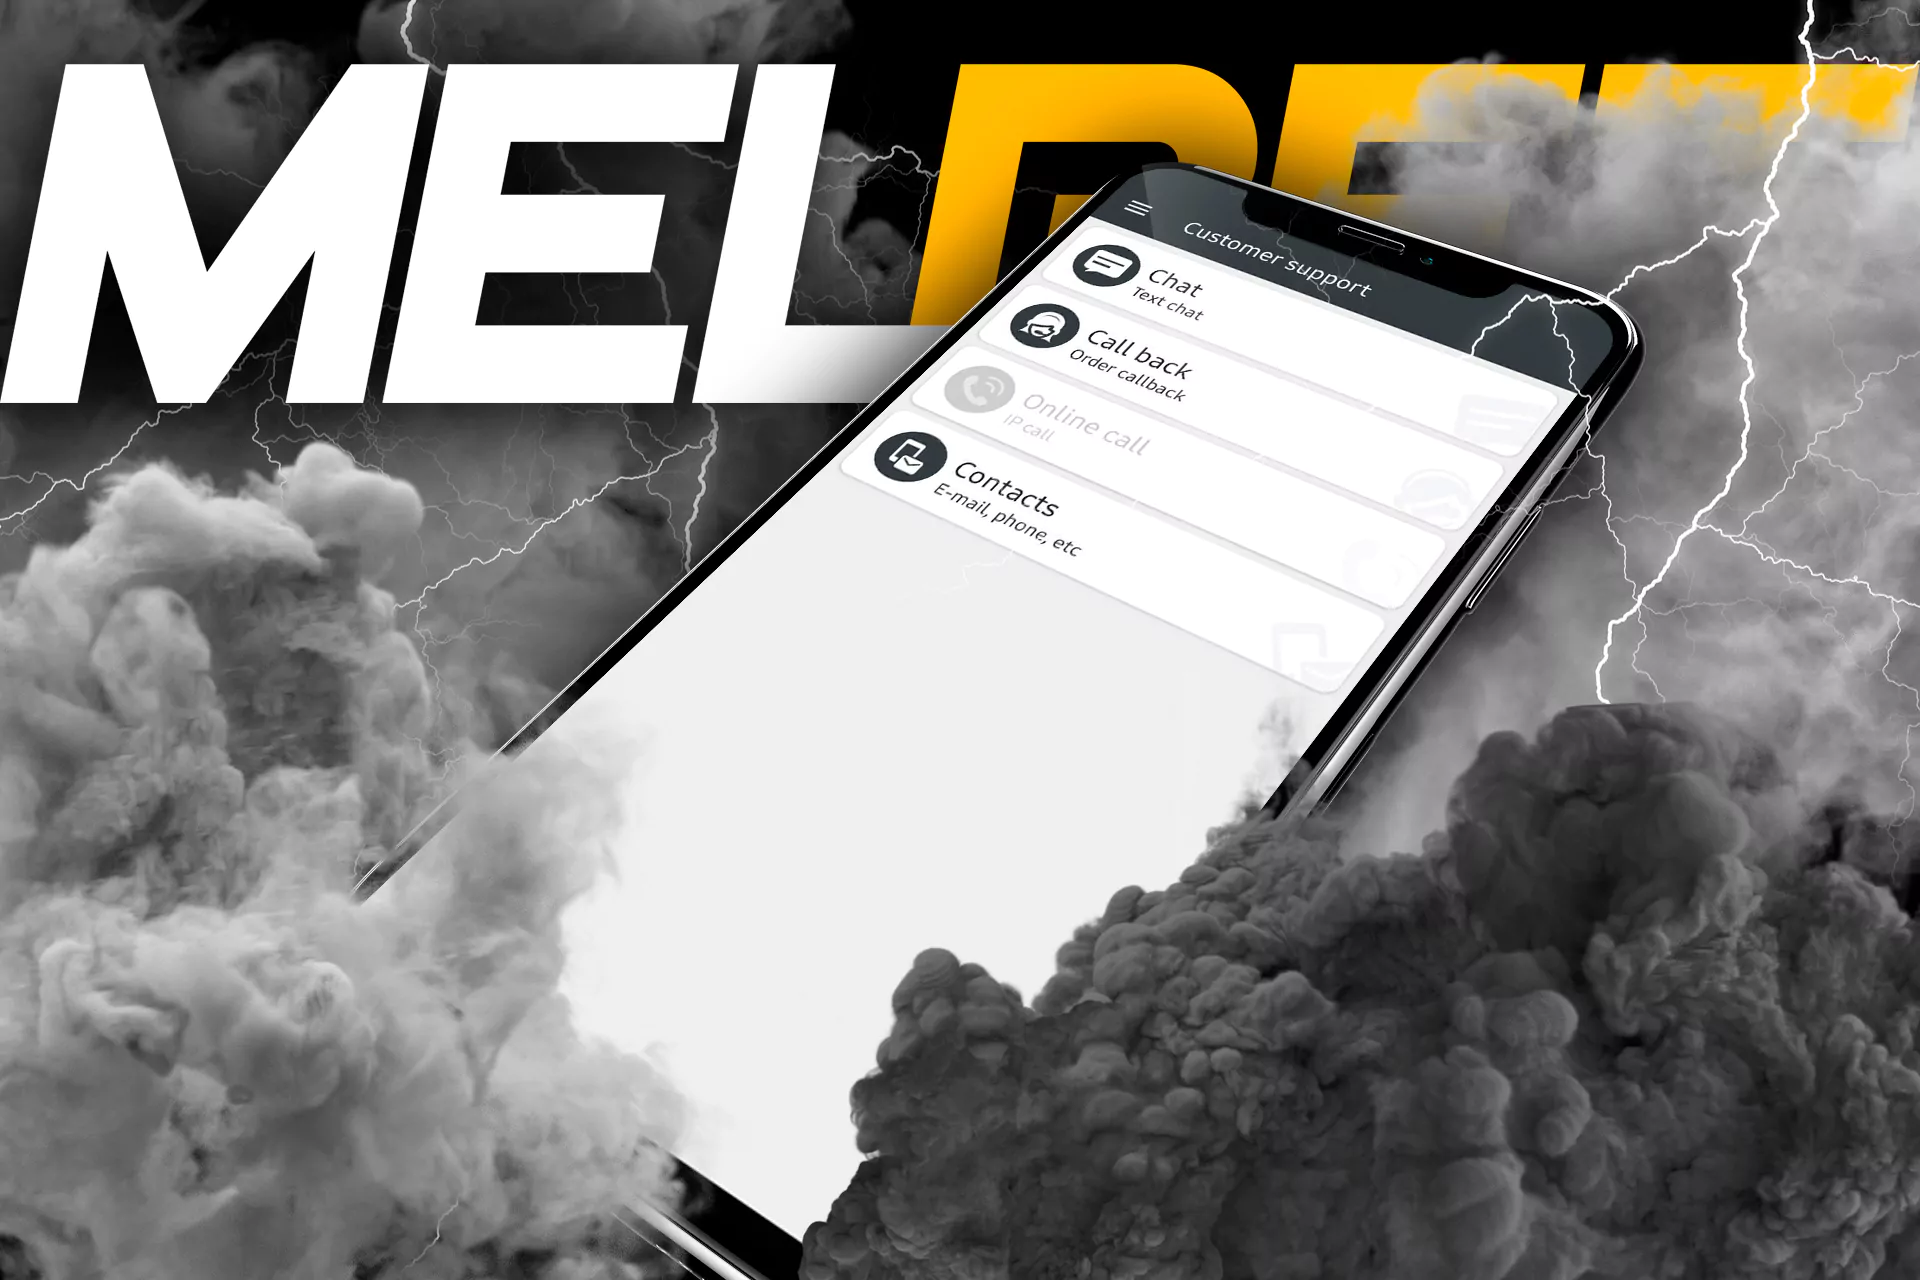 In case you have questions about betting in the app, don't hesitate to ask Melbet customer support.